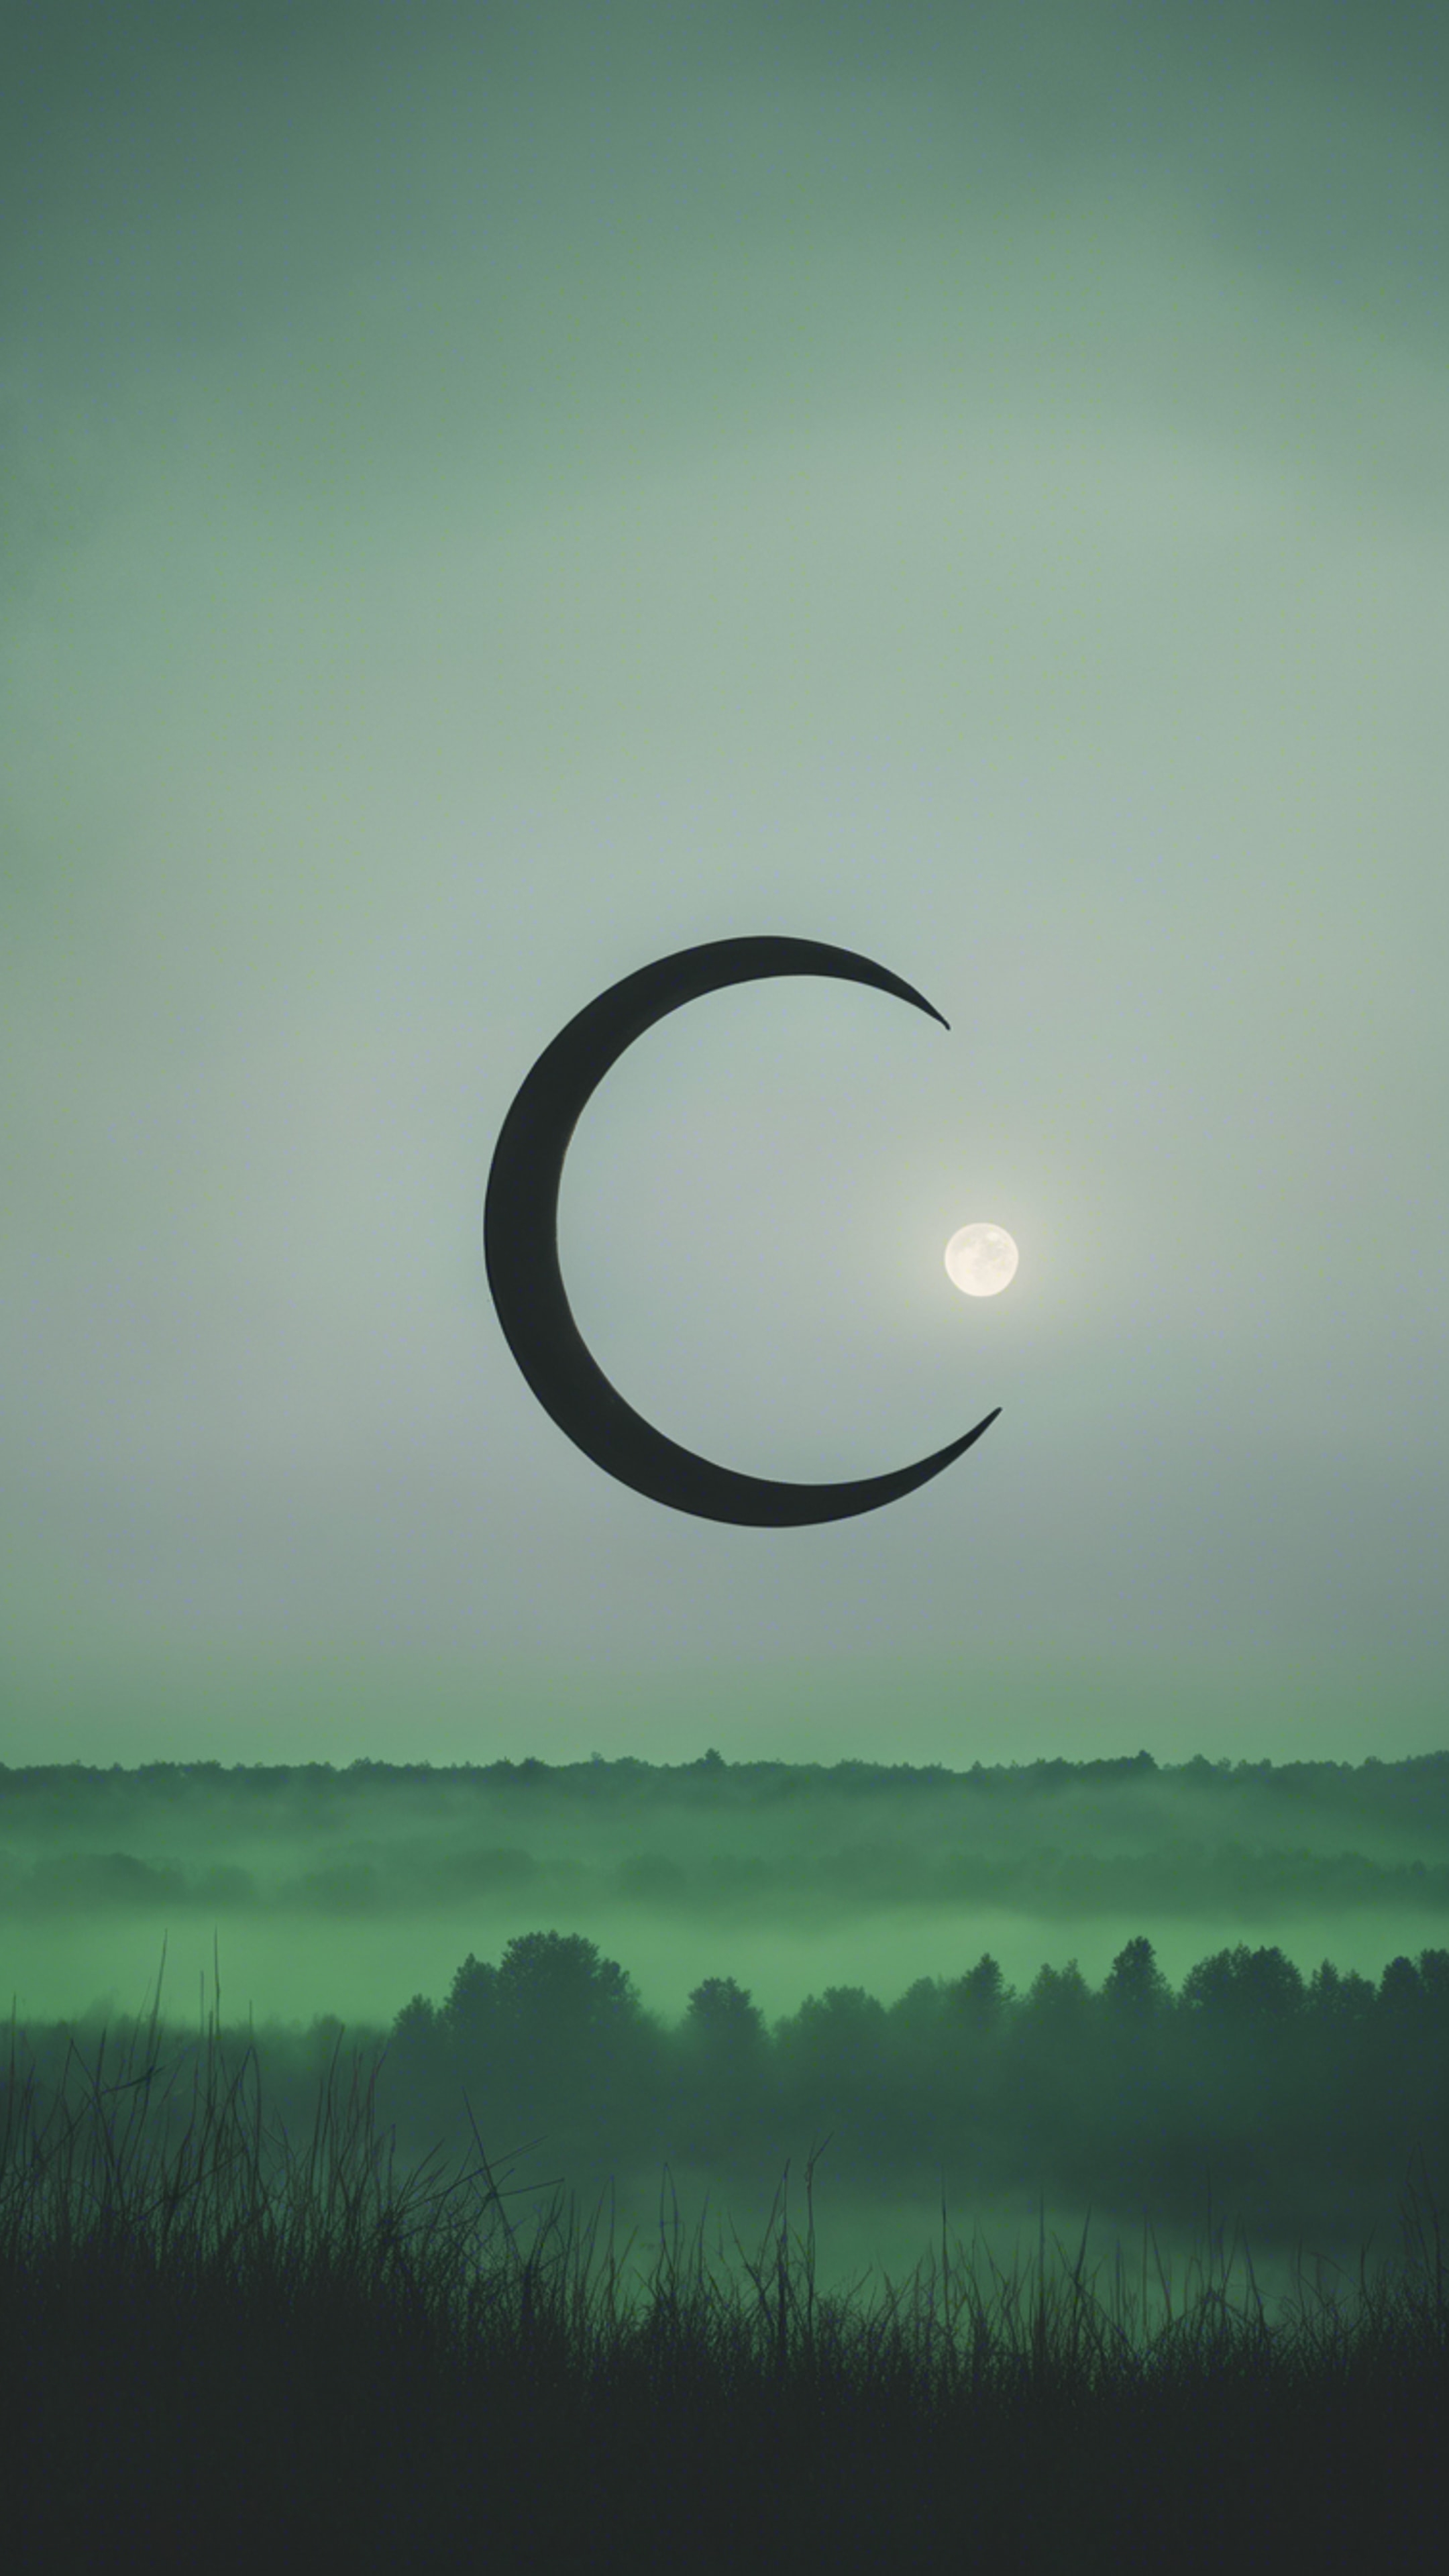 Gothic view of a black crescent moon under a green misty sky. Tapet[13b0789ef30c4bbcb3bb]